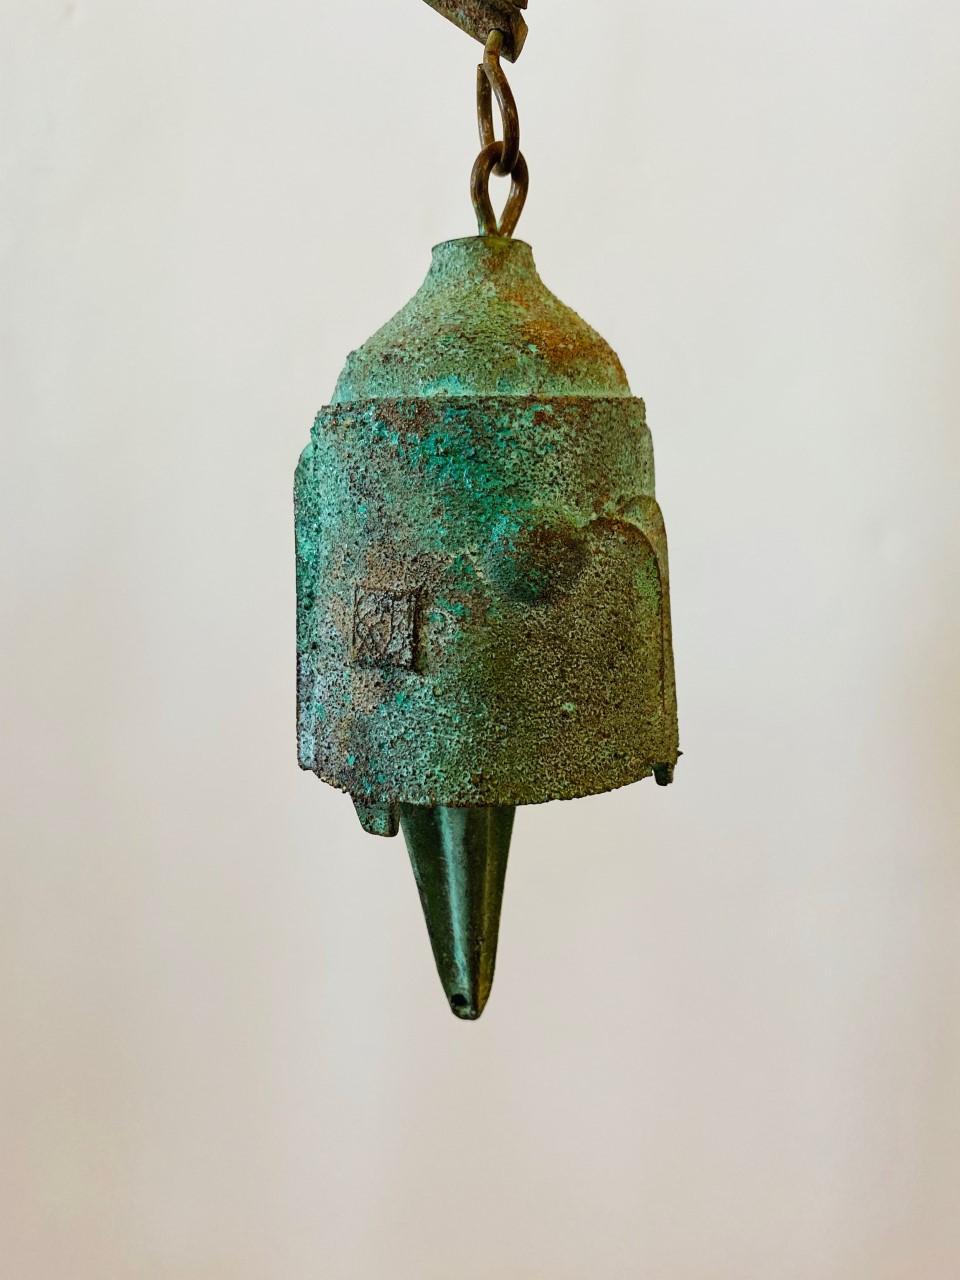 Beautiful vintage bronze Cosanti bell by Paolo Soleri. Uncommon shape and design. Fantastic patina and a great sound. Signed. A unique piece from a celebrated artist. Unique attribute to this piece is a bluish green patina.

Paolo Soleri